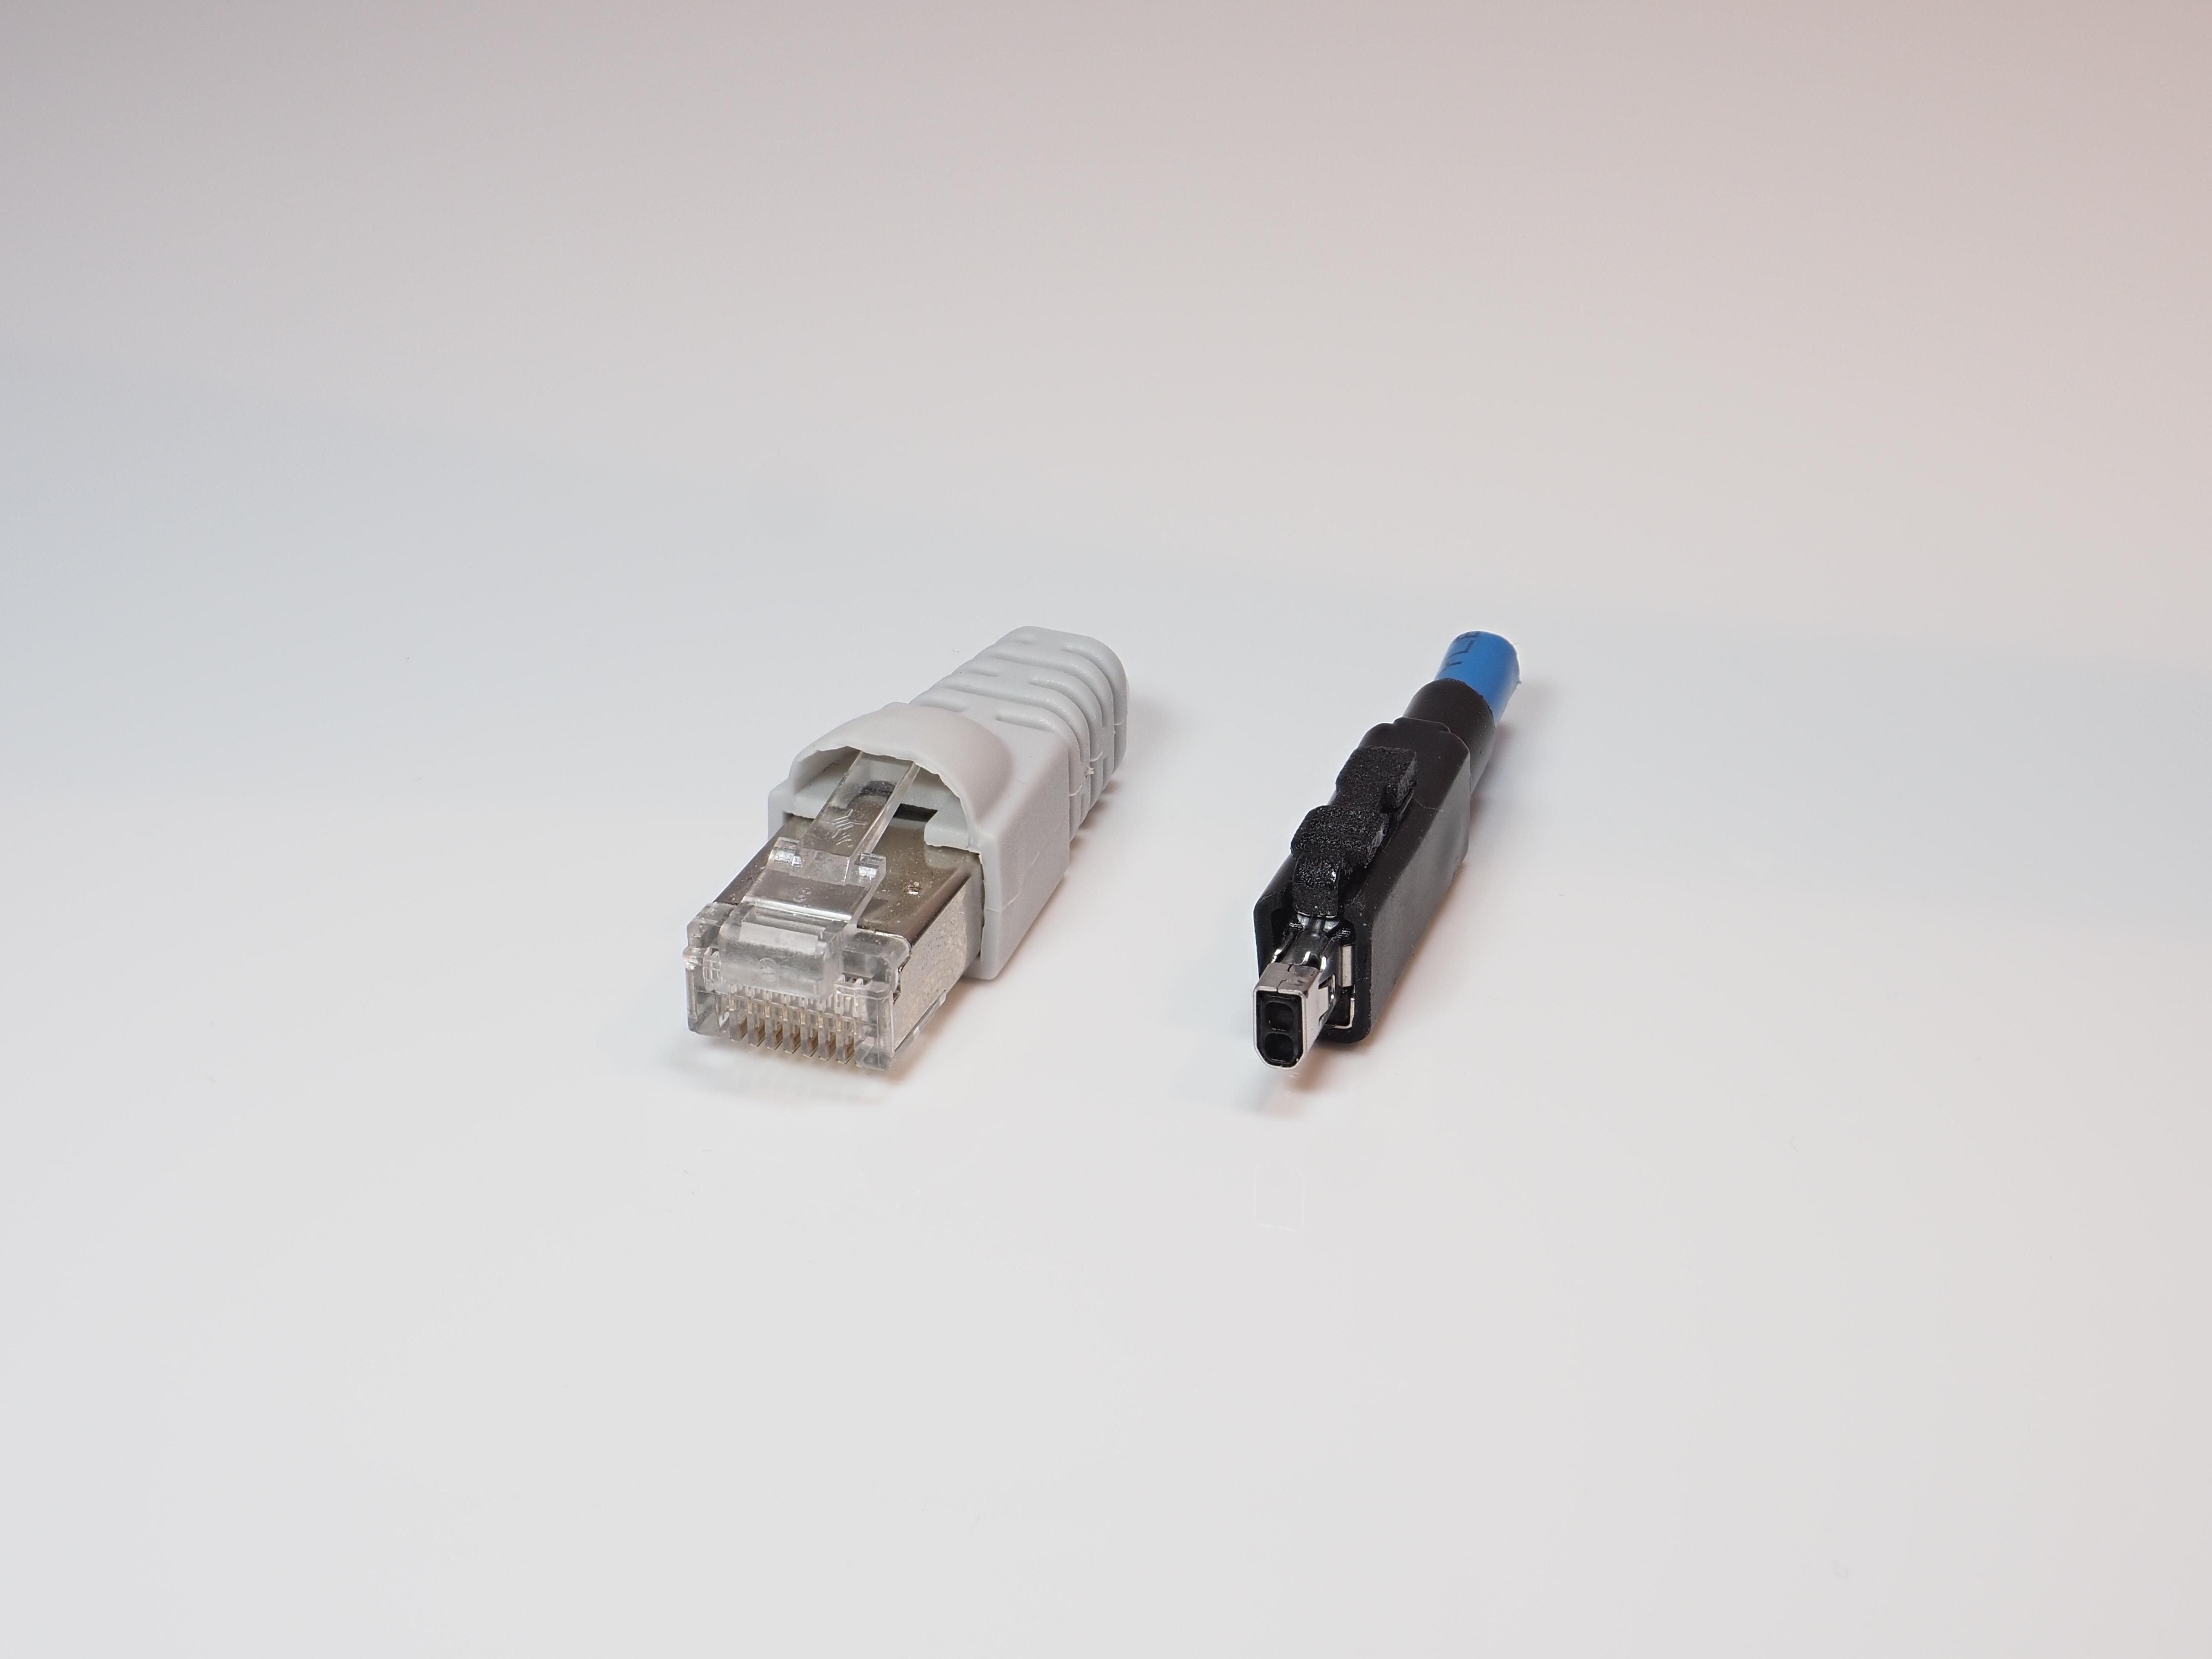 RJ45 and SPE